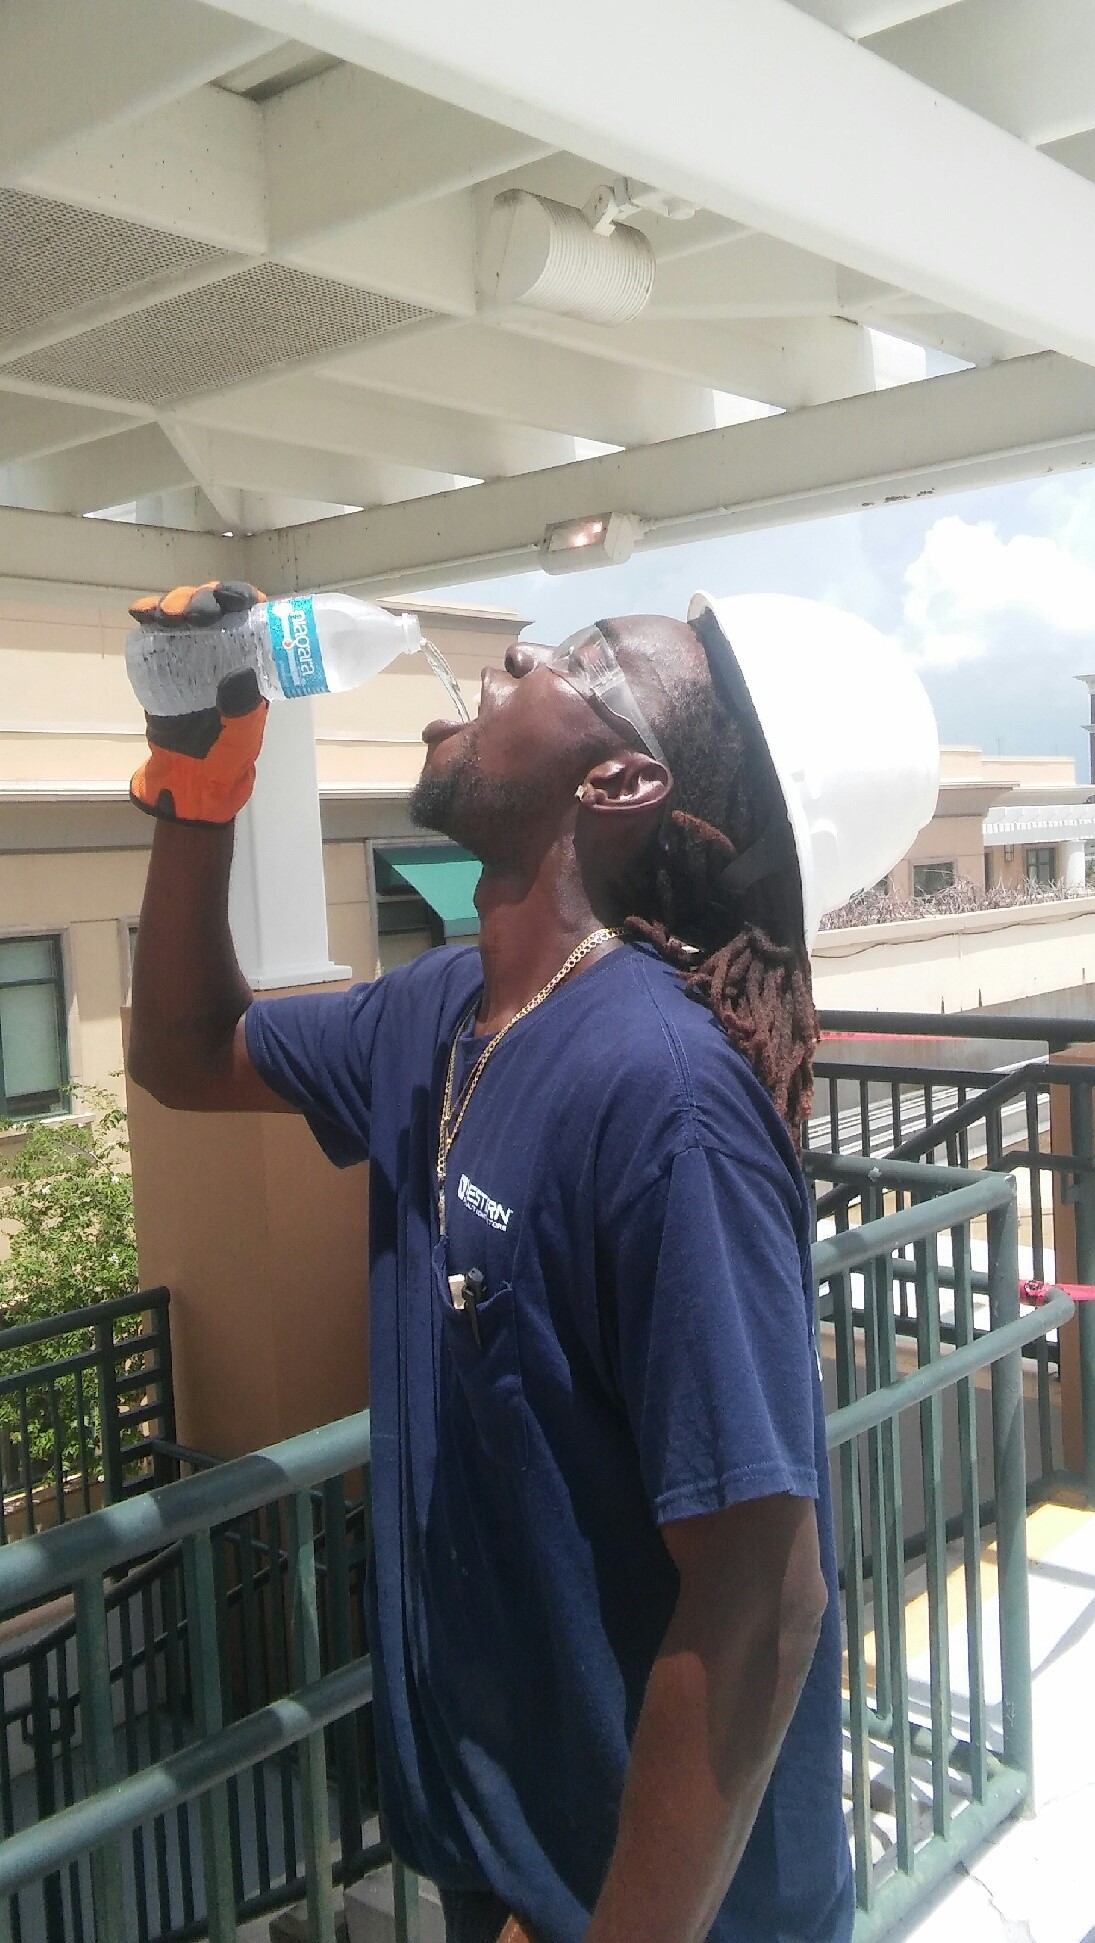 Western Worker Staying Hydrated in Heat